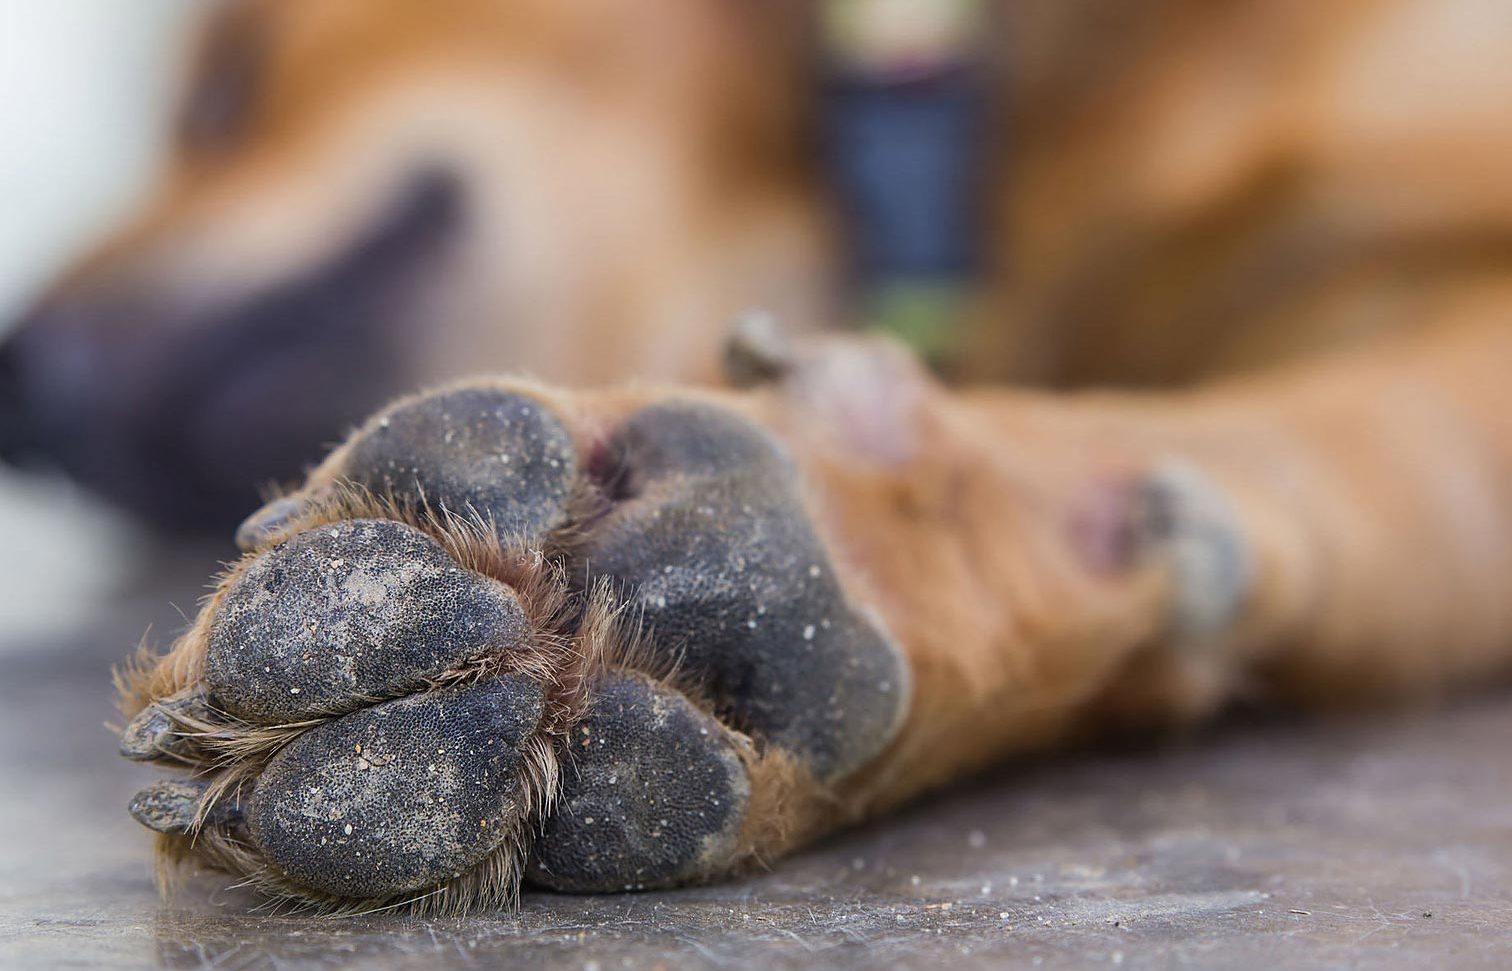 What is the extra thing on a dog's paw?